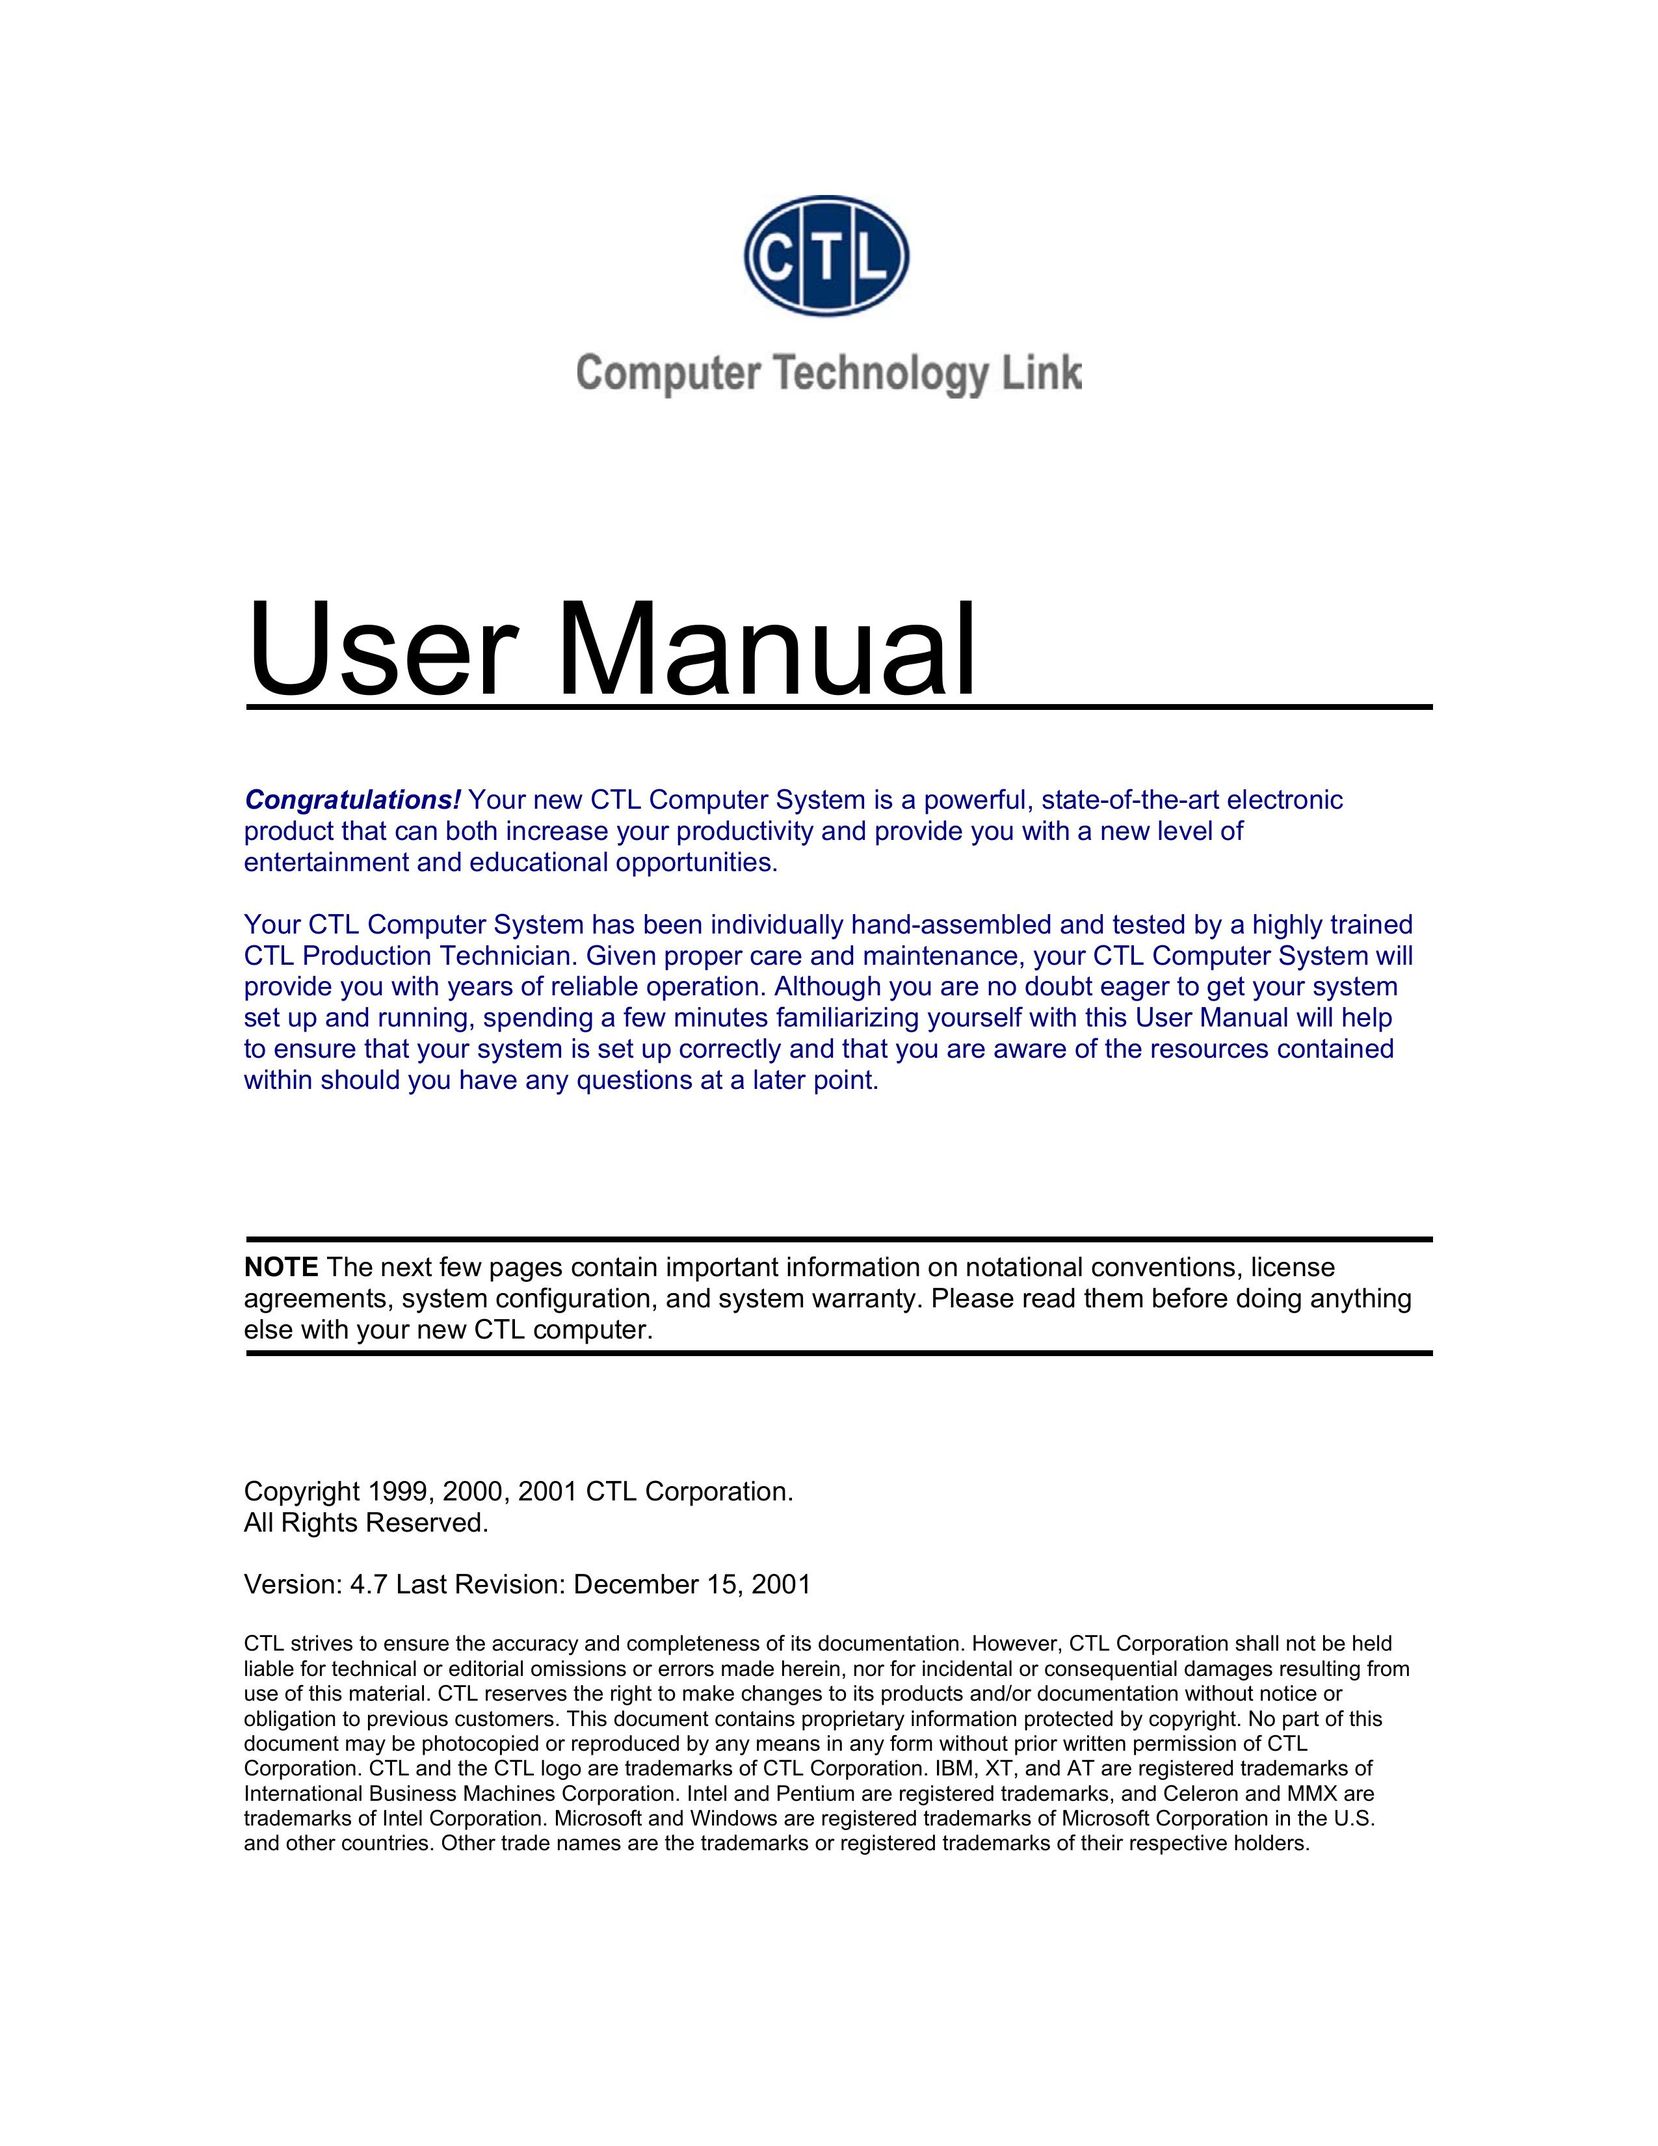 Computer Tech Link Vision Personal Computer User Manual